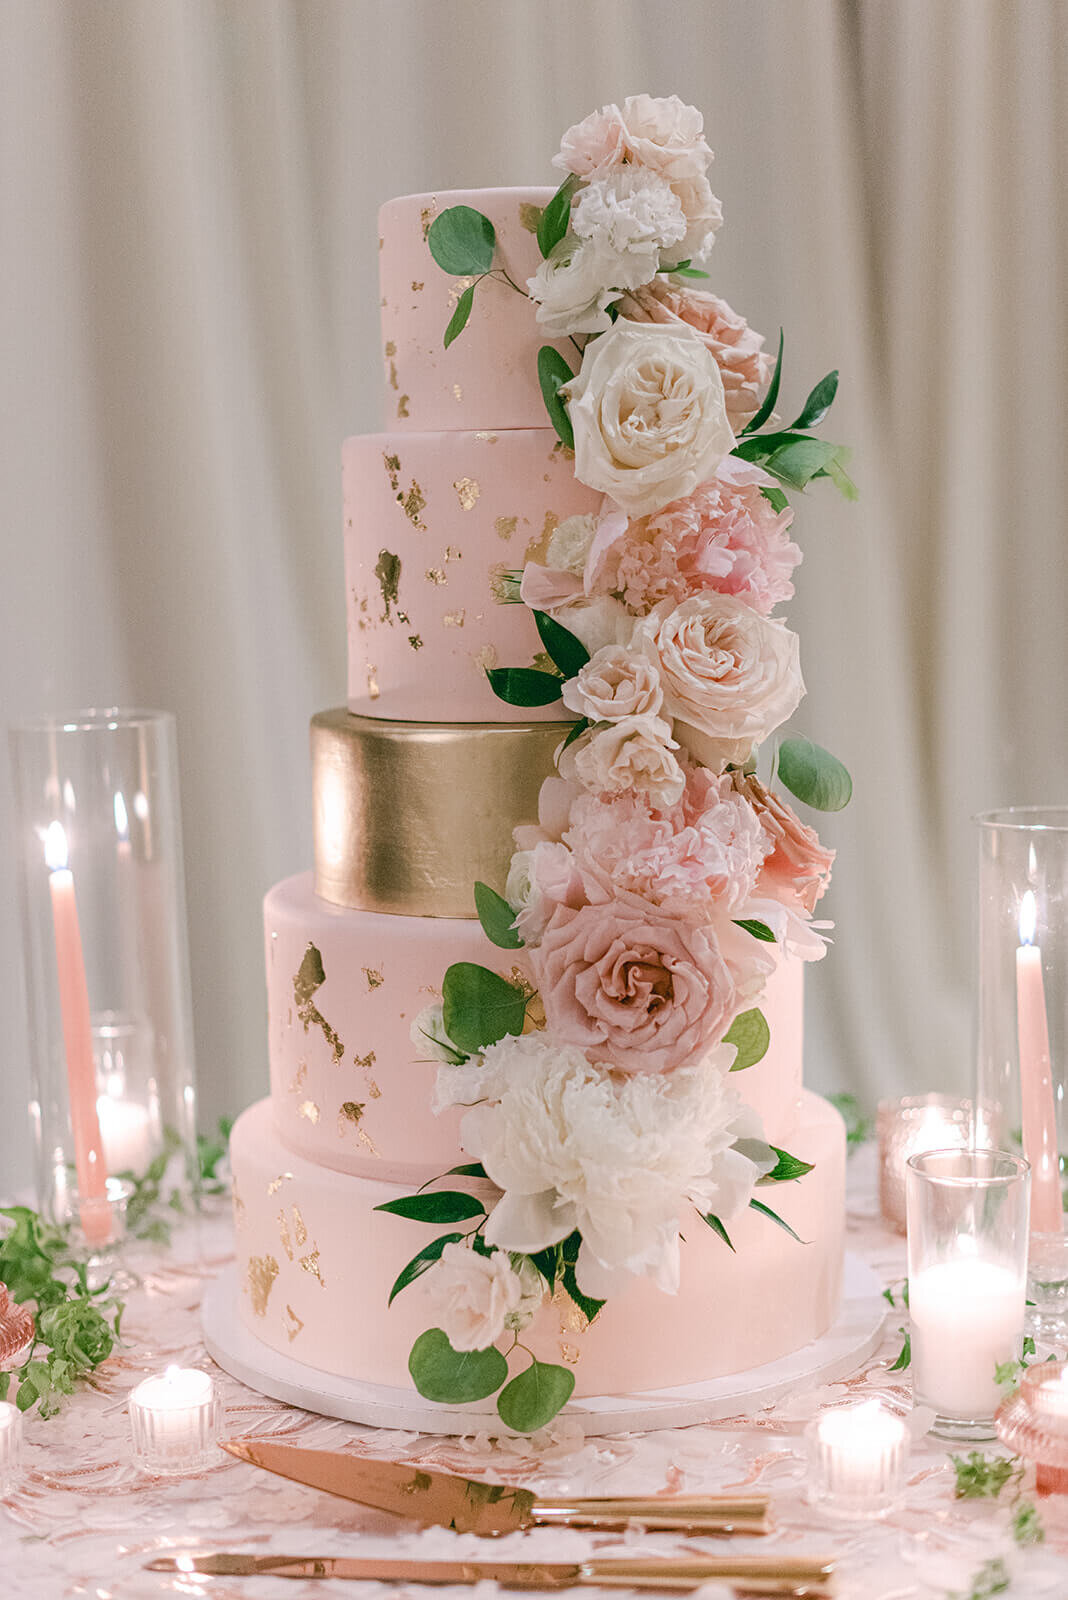 Blush and gold five-tiered wedding cake with floral details